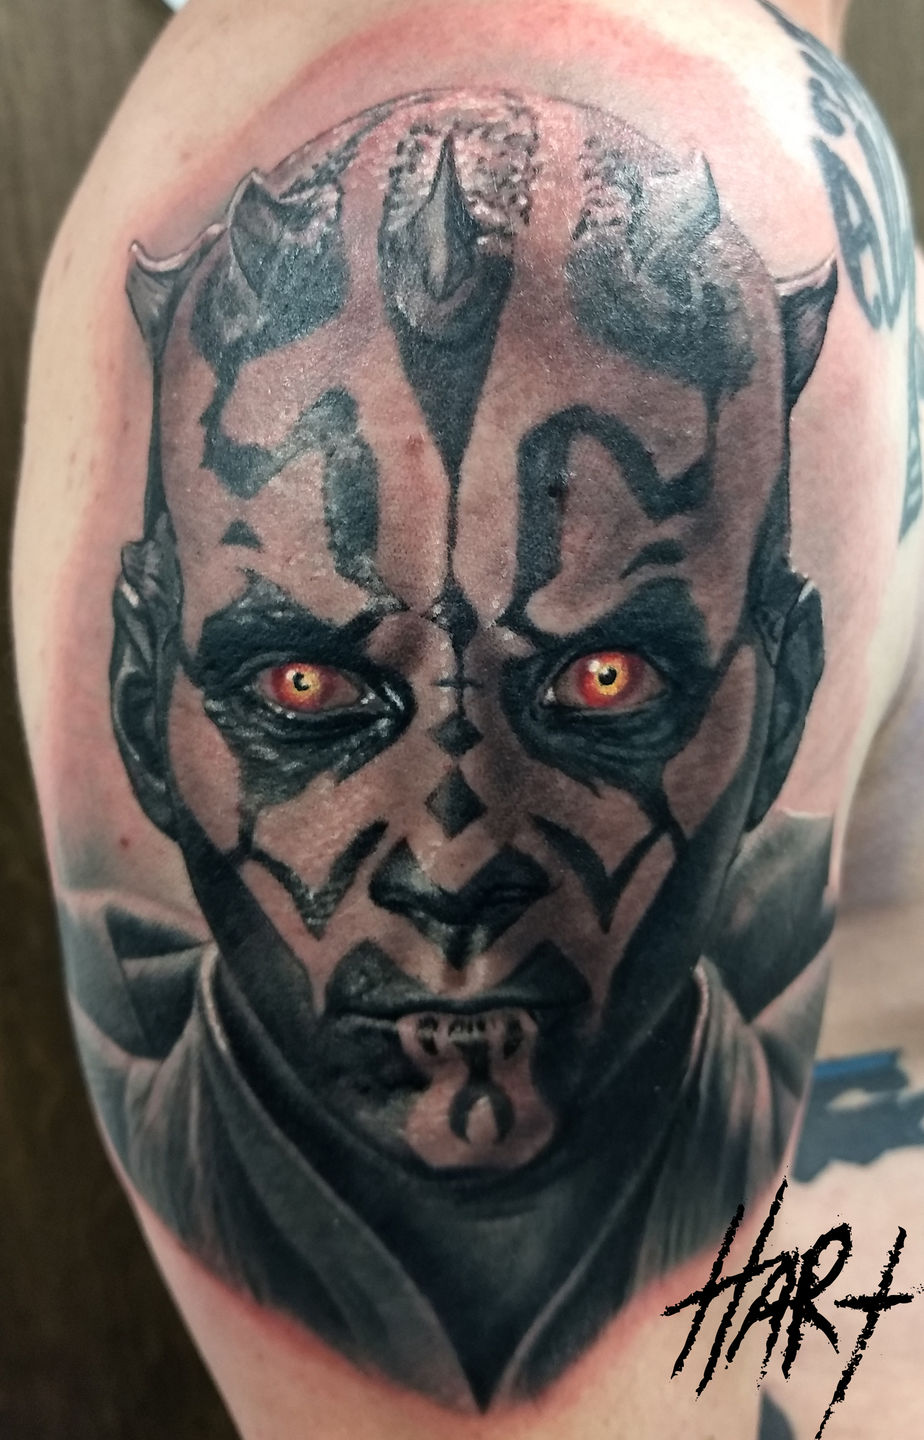 10 Best Darth Maul Tattoo IdeasCollected By Daily Hind News  Daily Hind  News